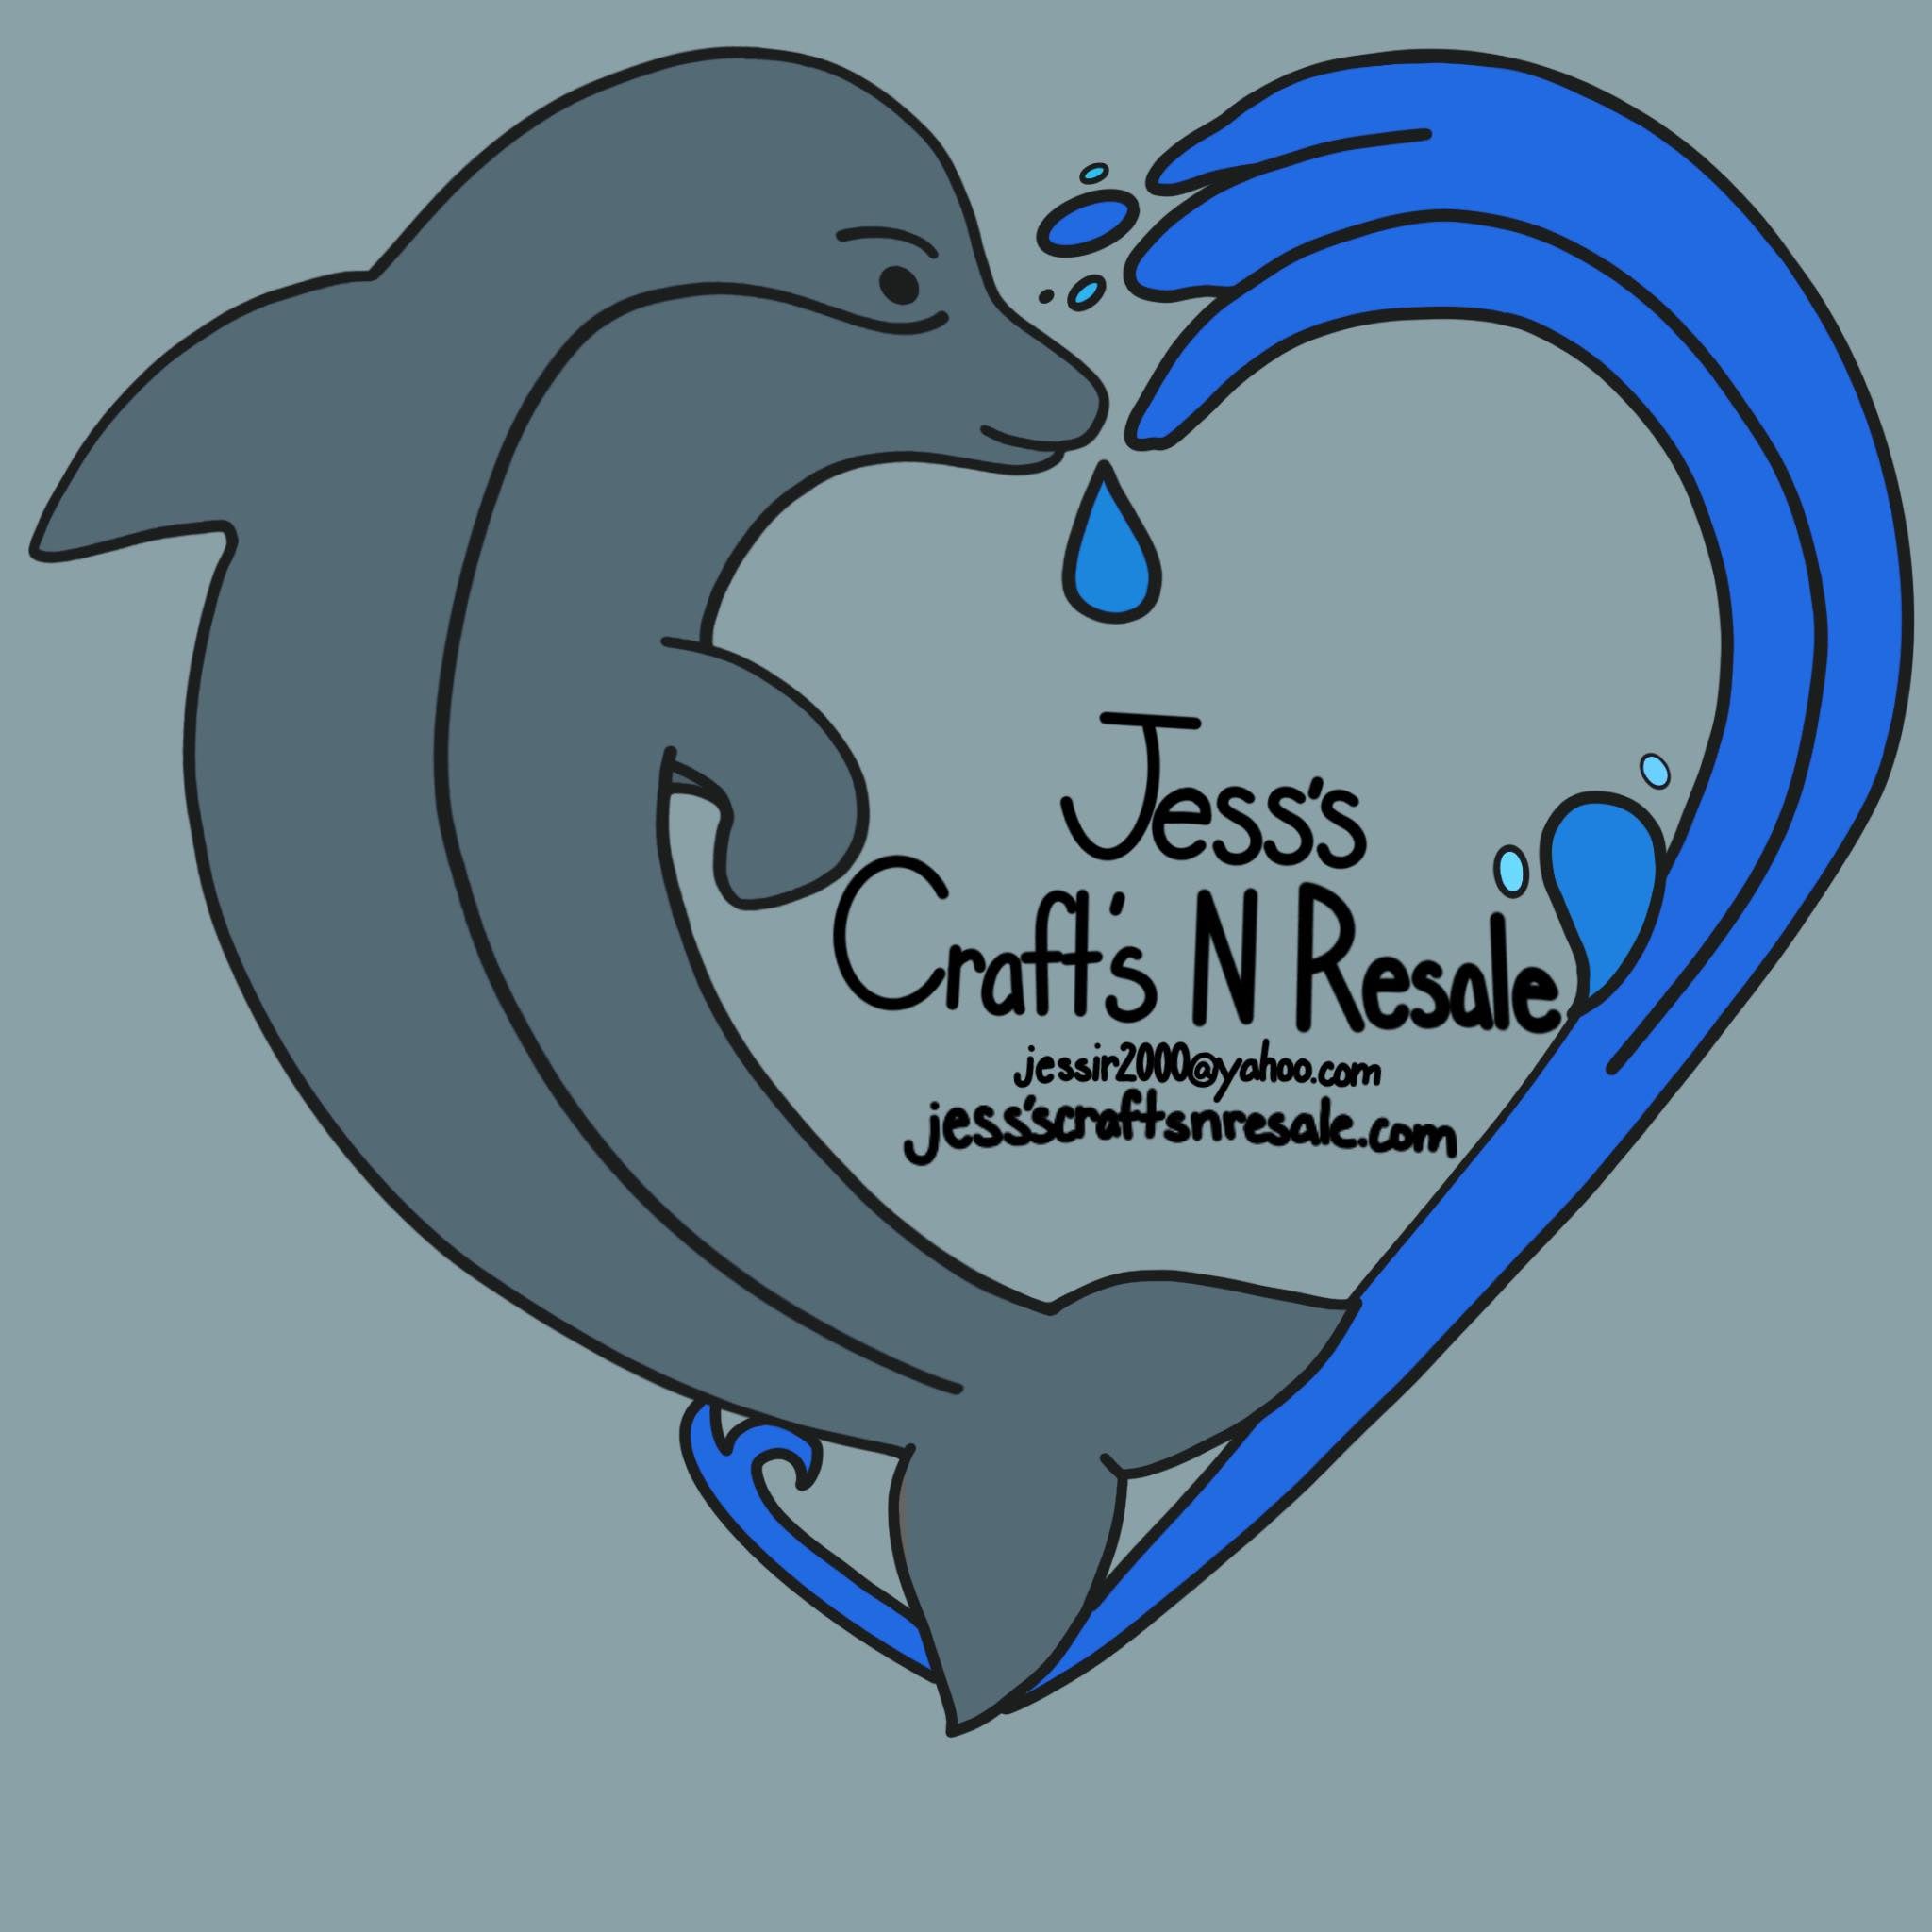 Jess's Craft's and Resale